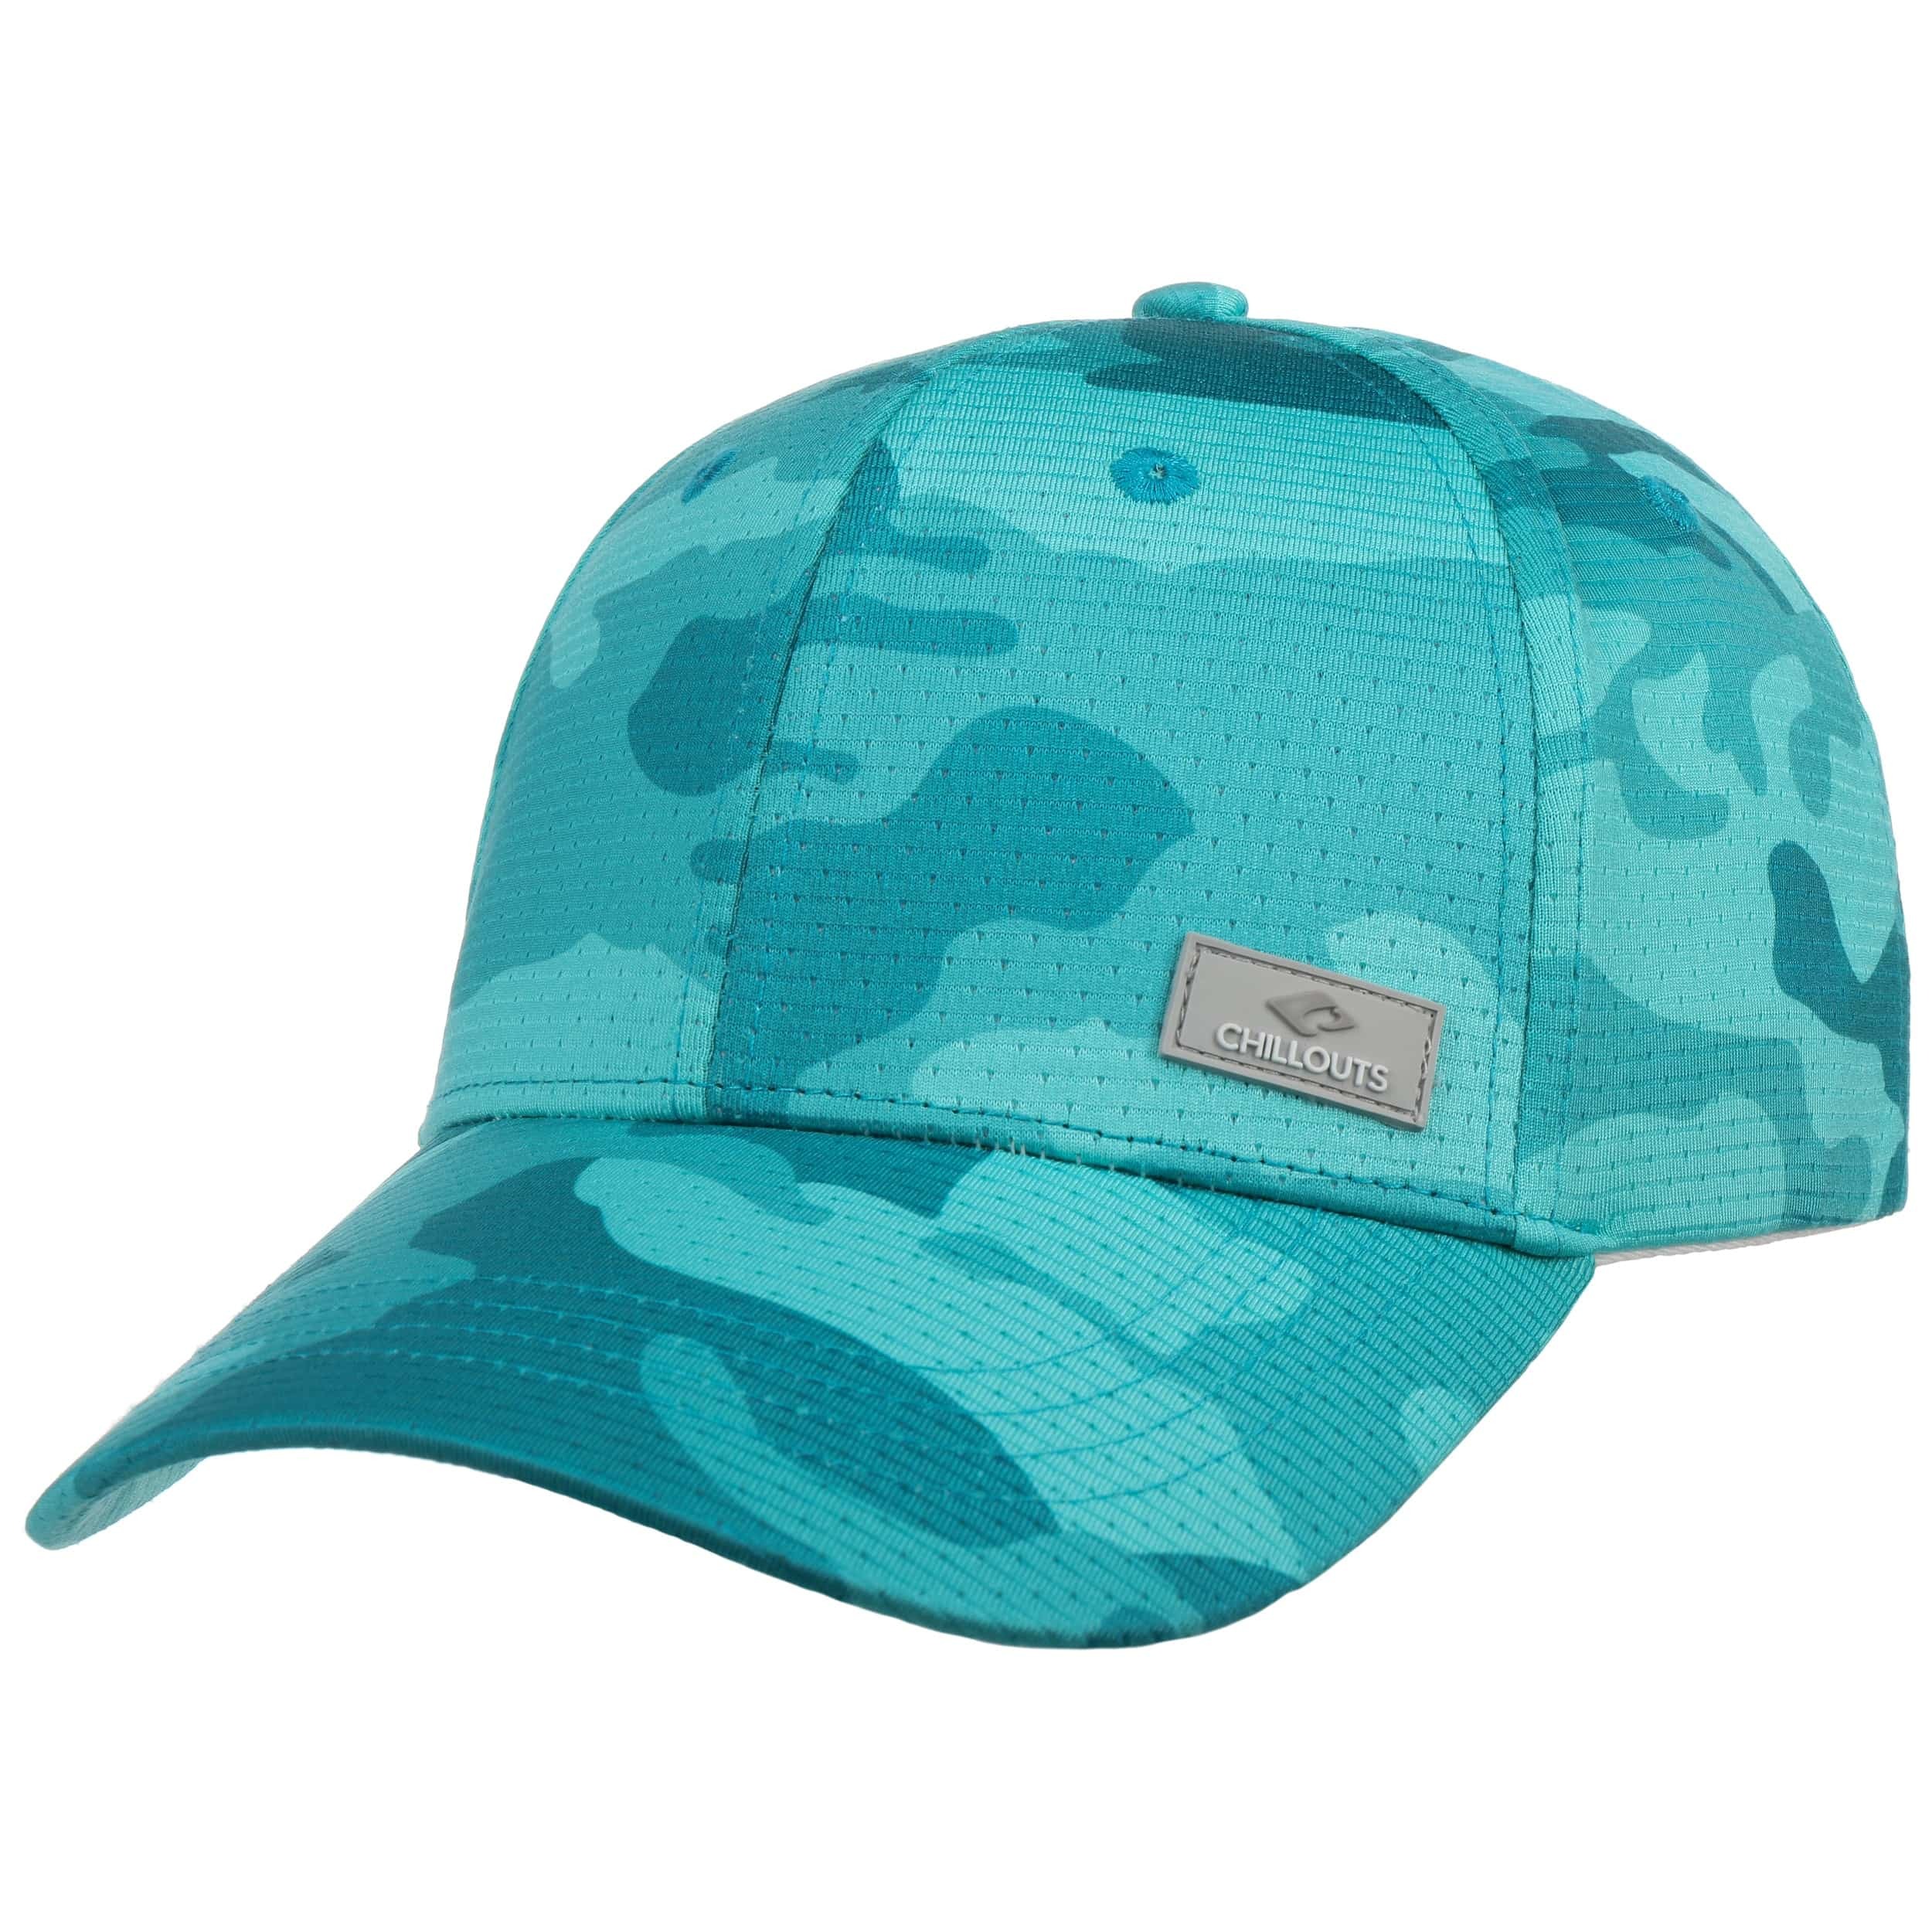 Camouflage 26,95 € - by Cap Chillouts Kampala